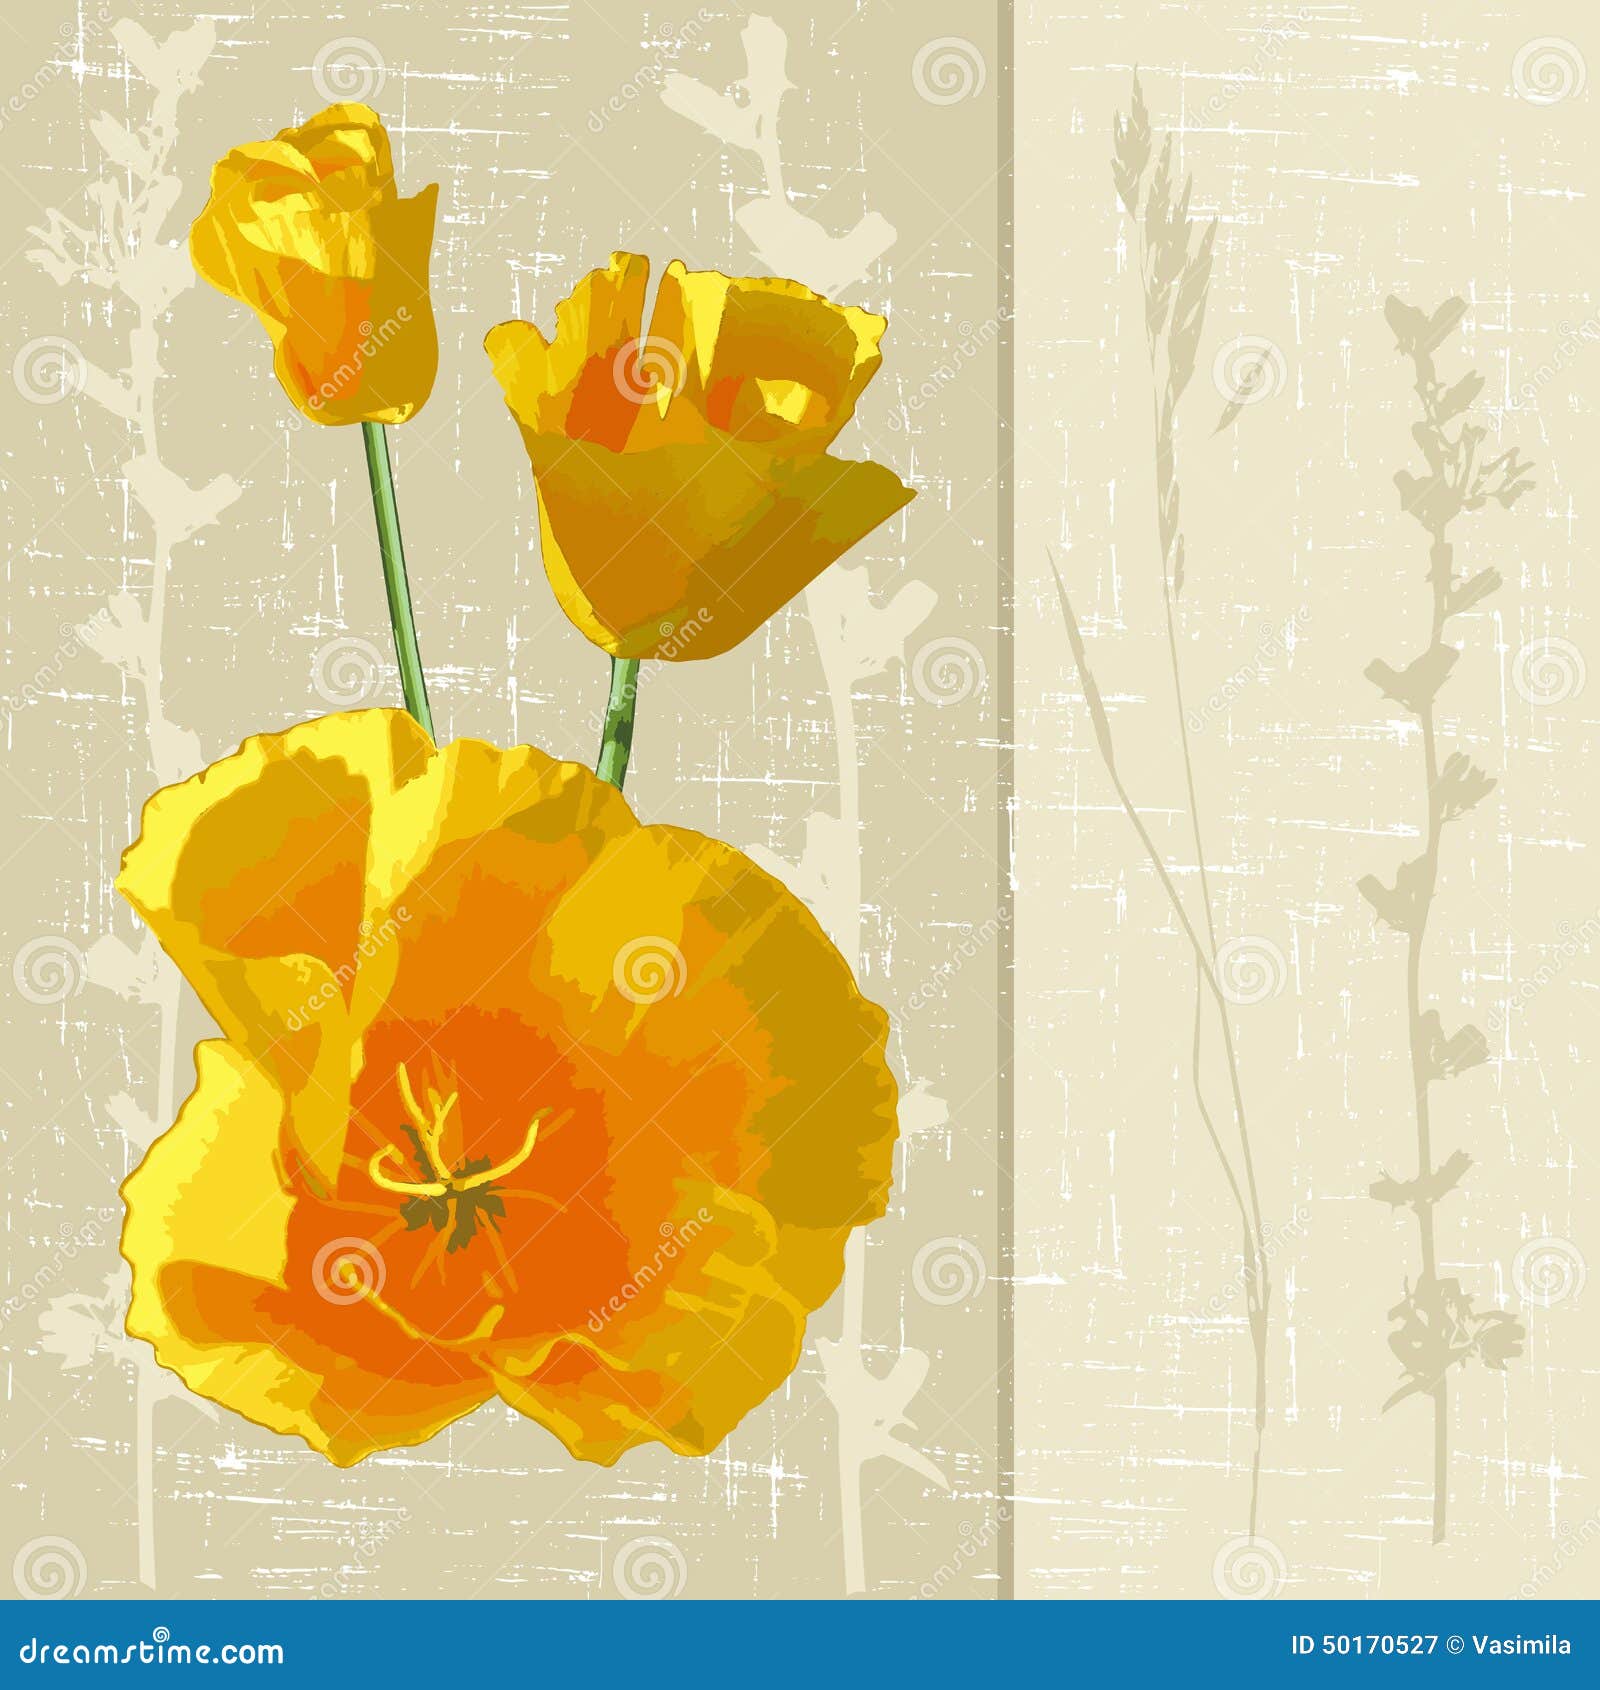 Sunny flowers. Decorative background with yellow flower. vector illustration